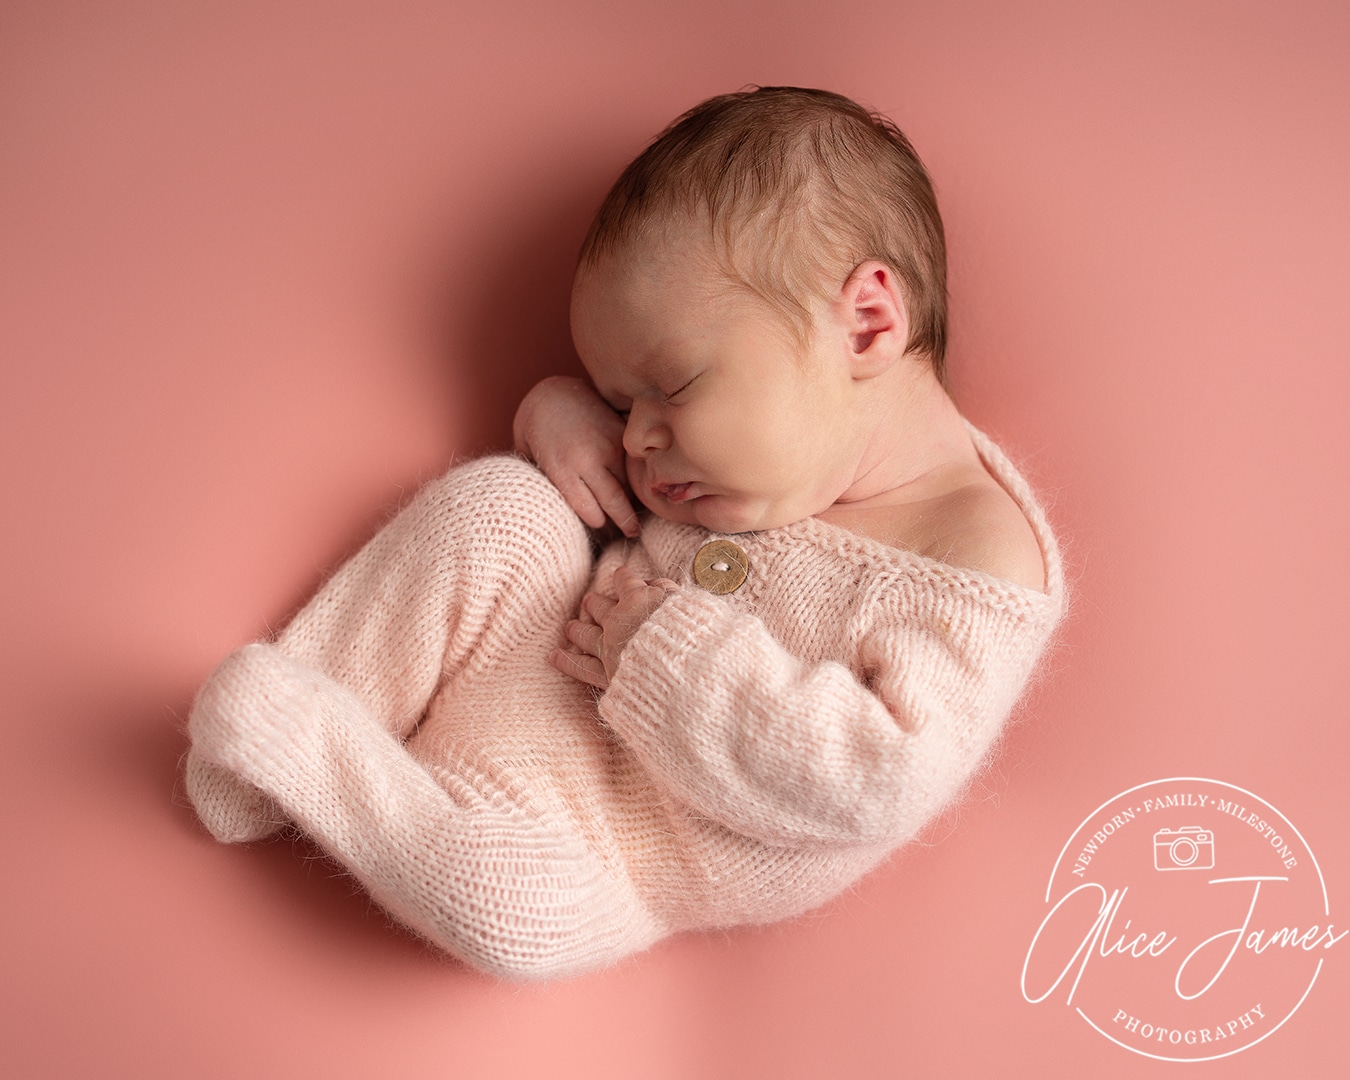 Baby girl asleep on a pink blanket, wearing. pink knitted outfit taken at a newborn photoshoot Hitchin by Alice James Photography